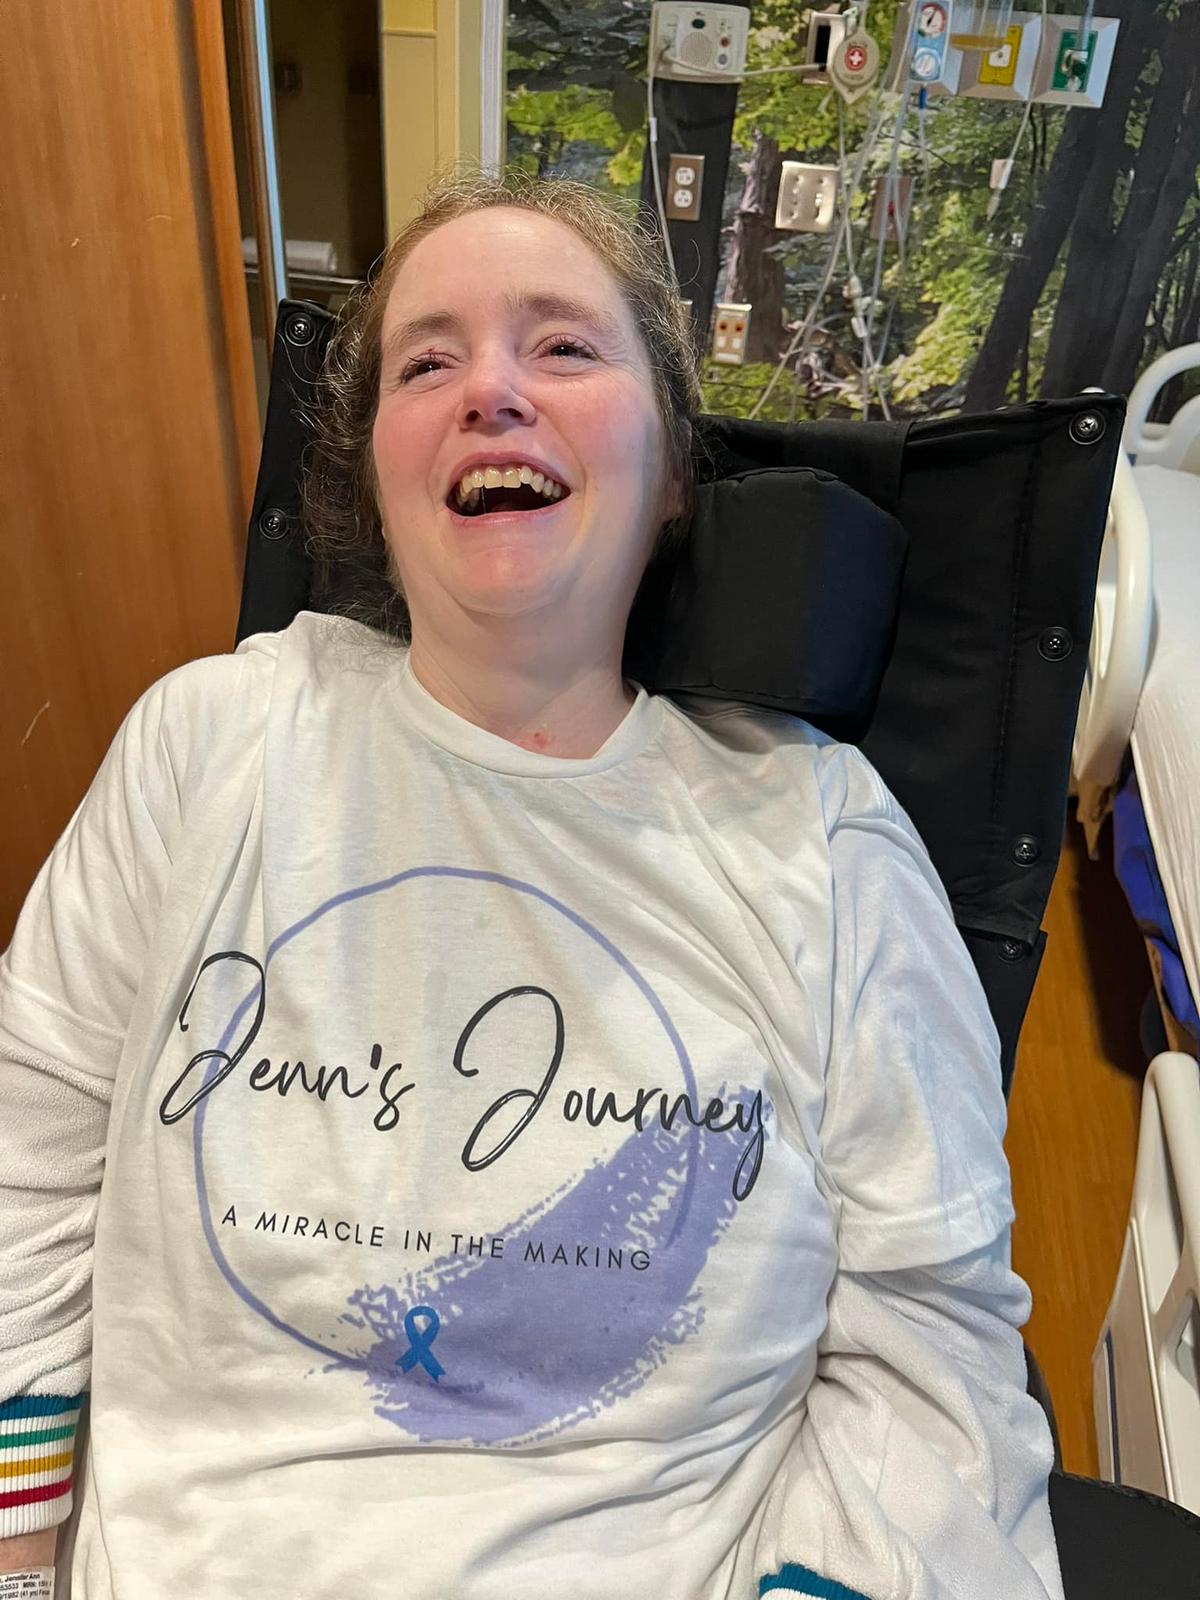 (Courtesy of <a href="https://www.facebook.com/profile.php?id=61554133355459">Jenn’s Journey: A Miracle in the Making</a>)